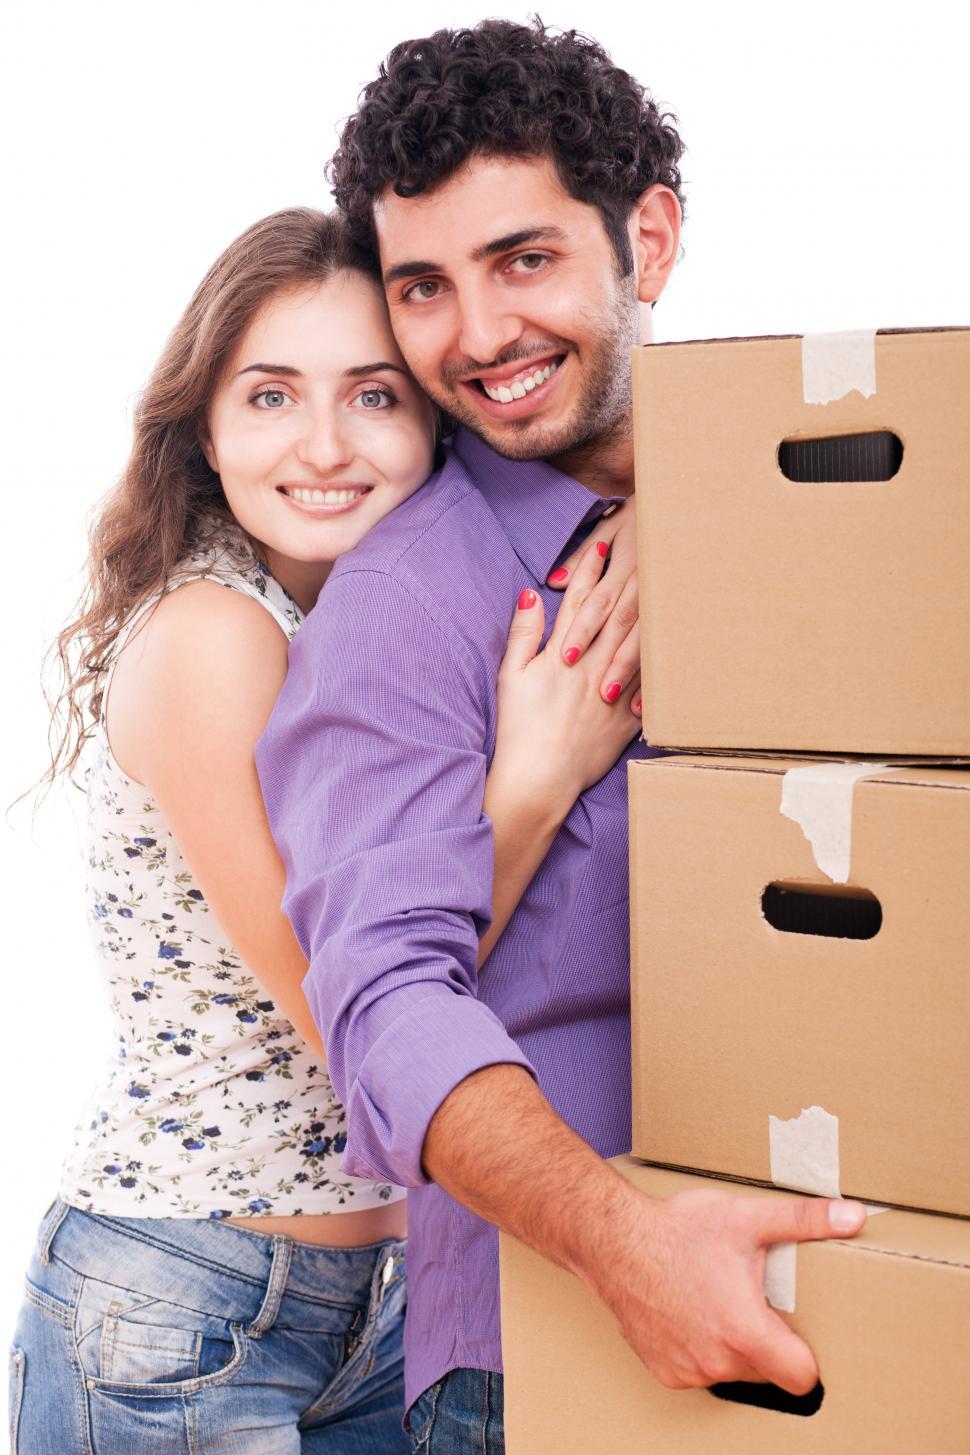 Download Free Stock Photo of Young couple carrying moving boxes 